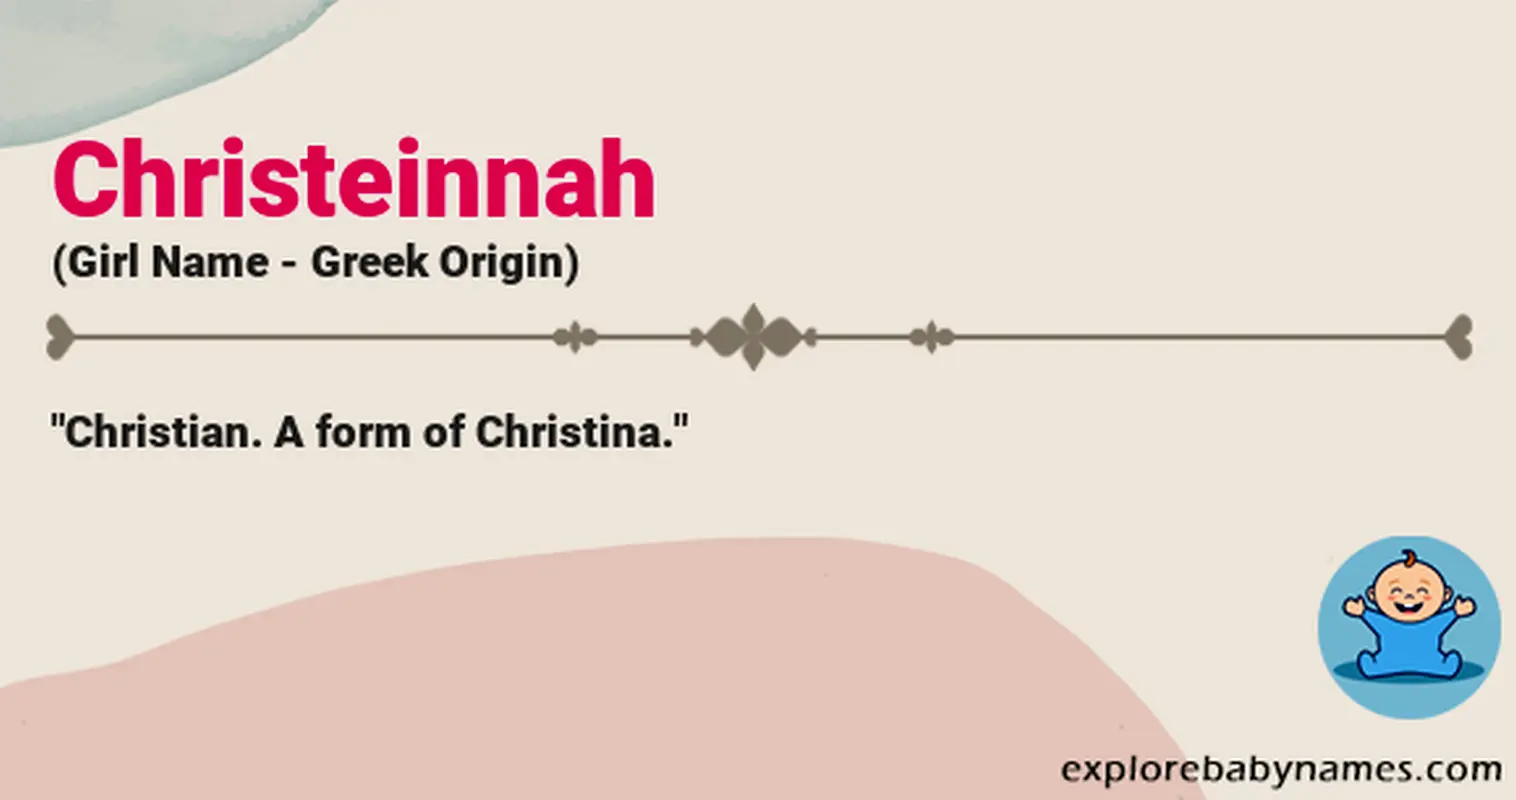 Meaning of Christeinnah